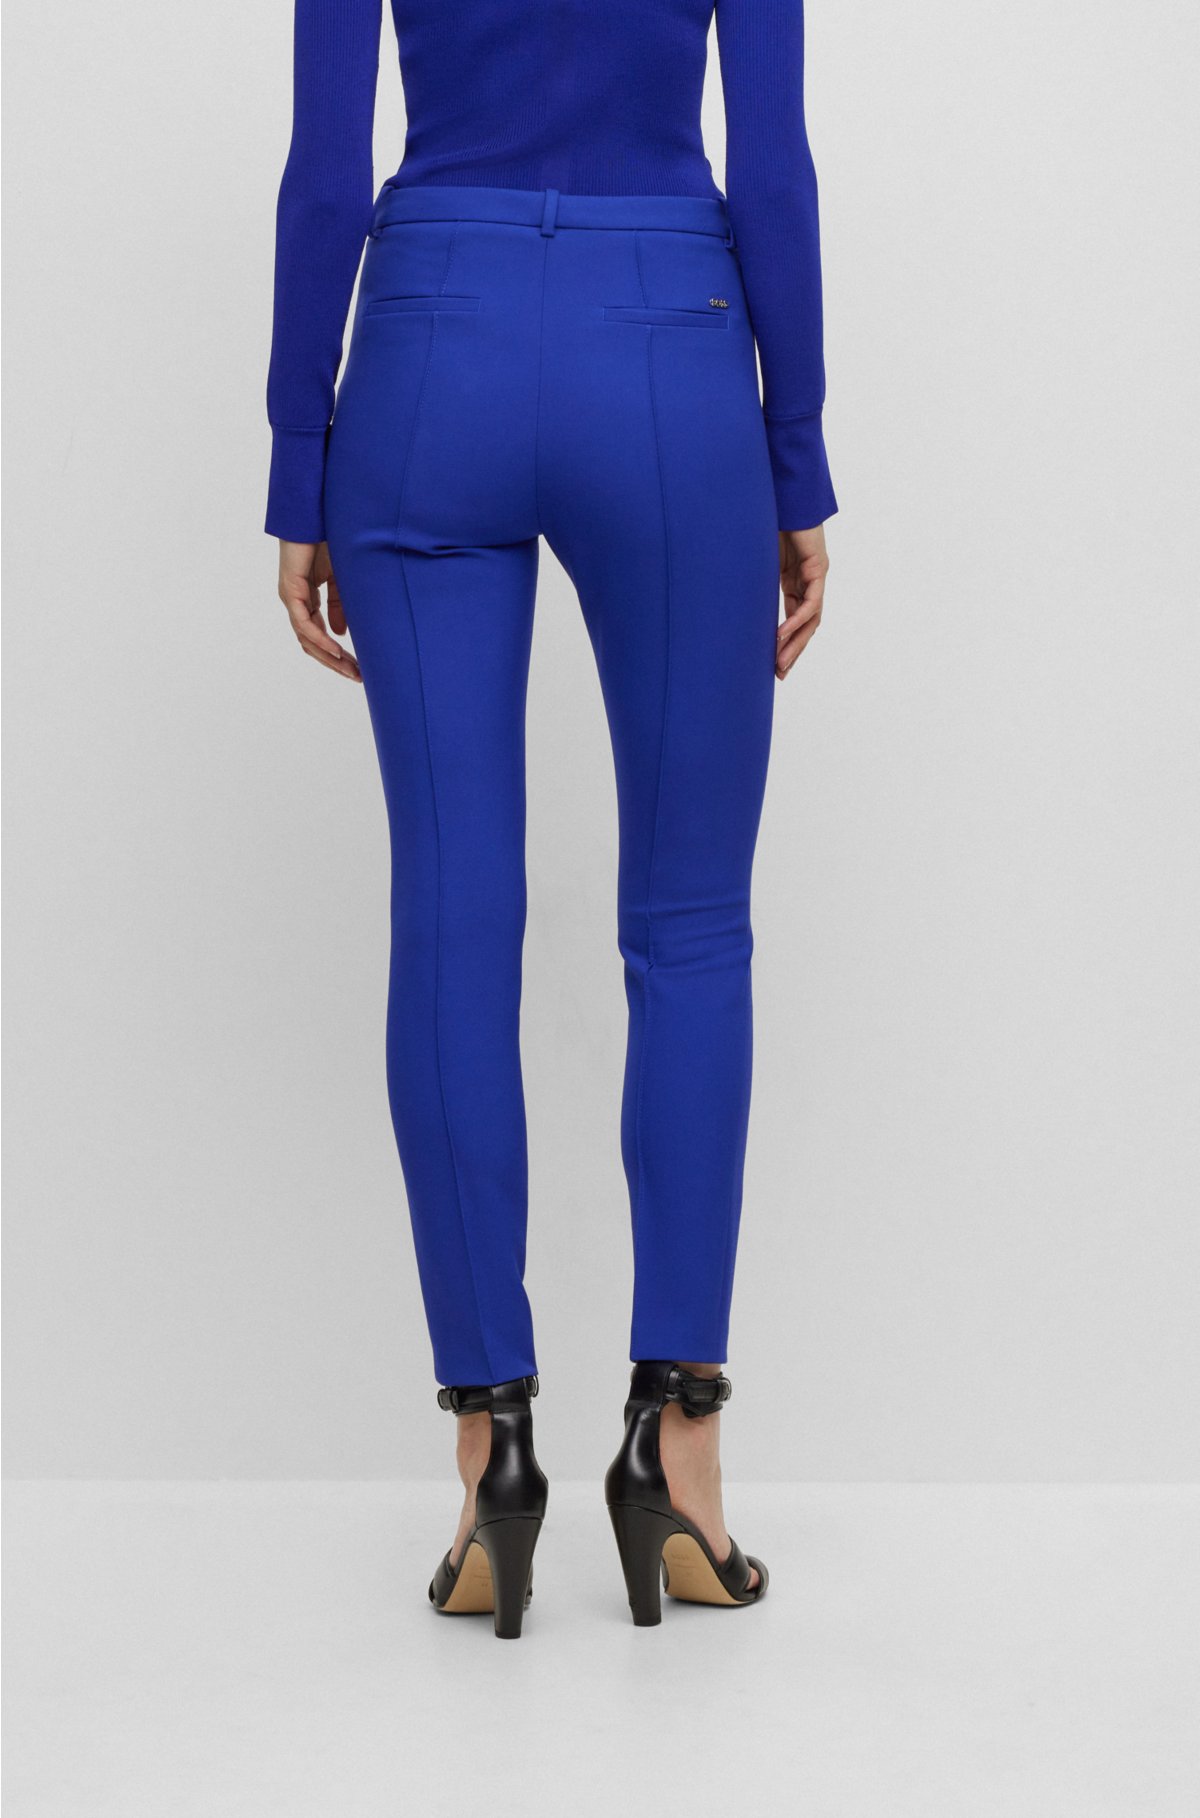 BOSS - Slim-fit pants in stretch fabric with pintuck pleats